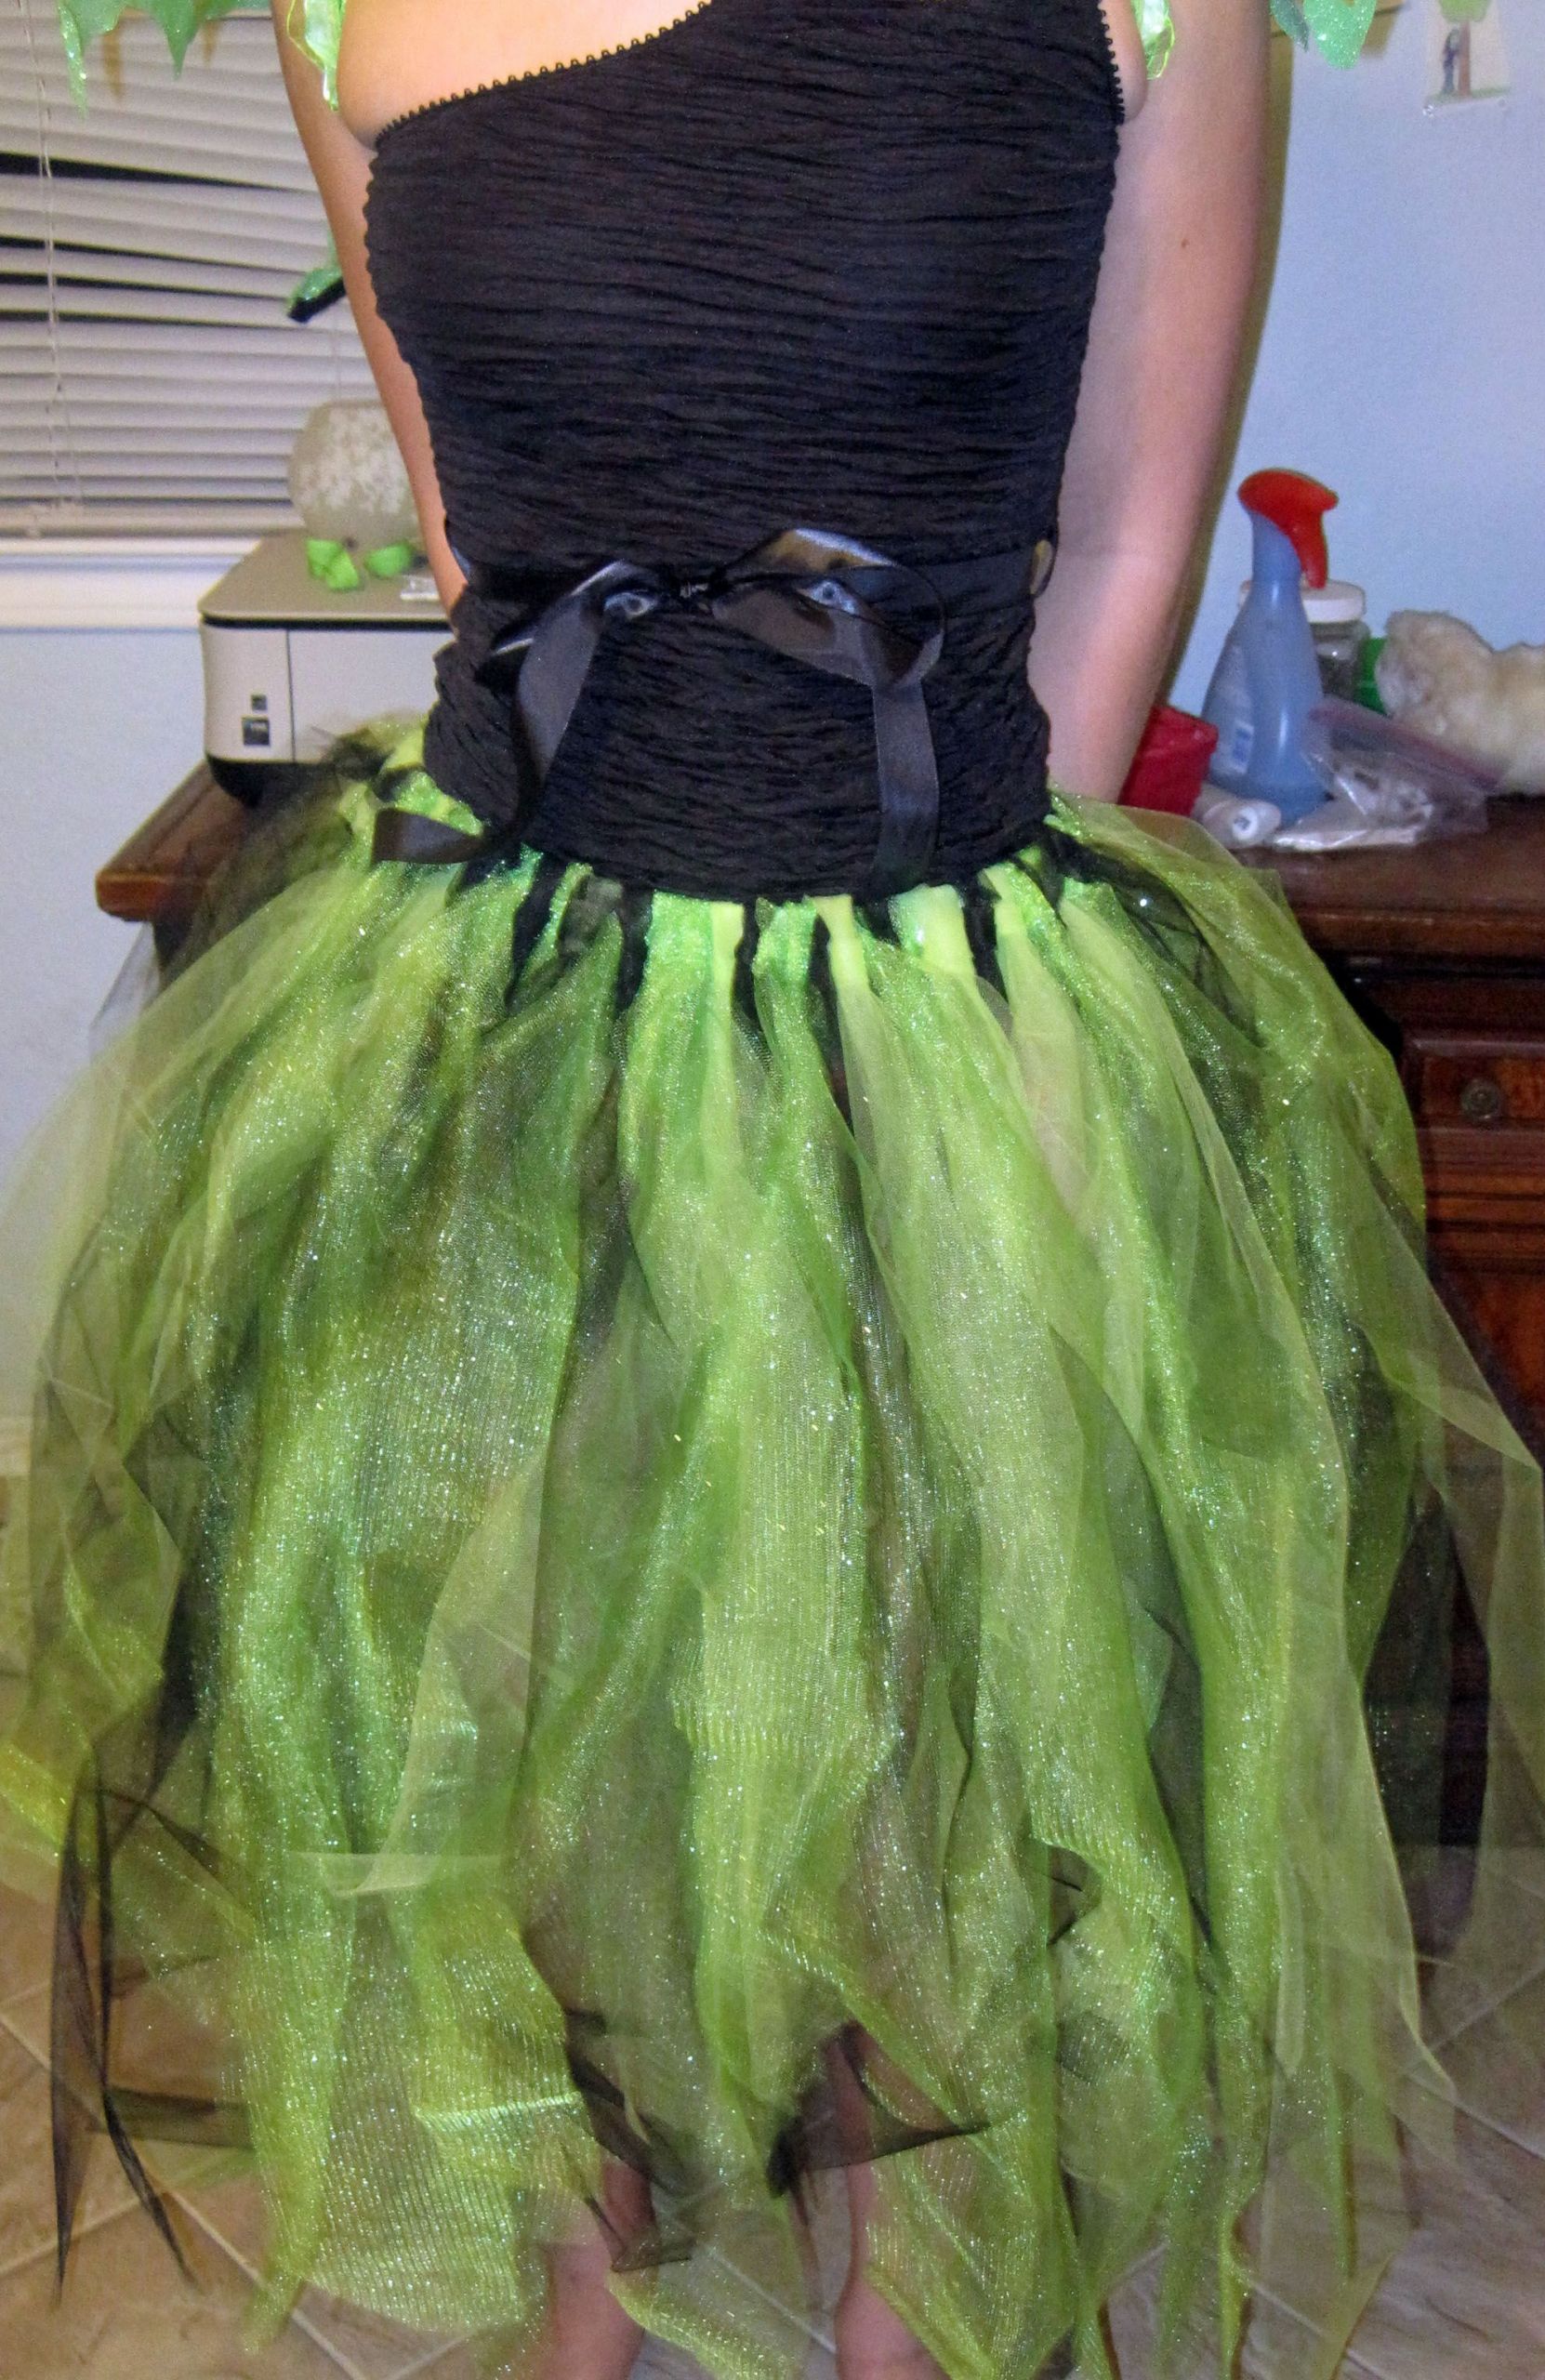 Tulle Dress Toddler DIY
 Our DIY Tutu skirt for my daughter s fairy costume